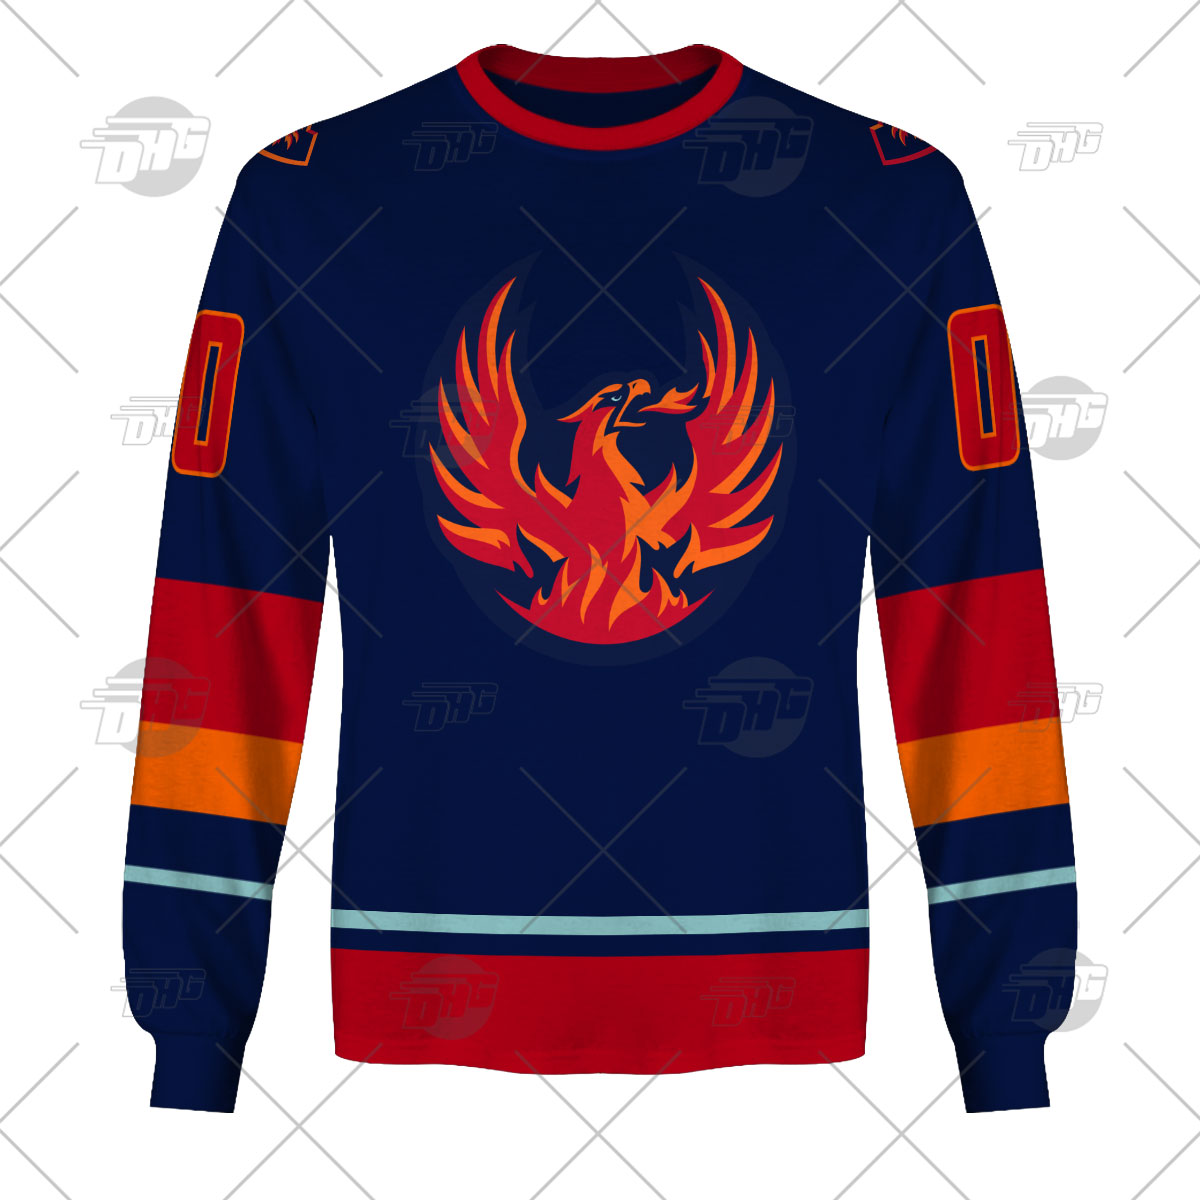 Photos: Firebirds hockey jersey revealed at the Palm Springs Air Museum